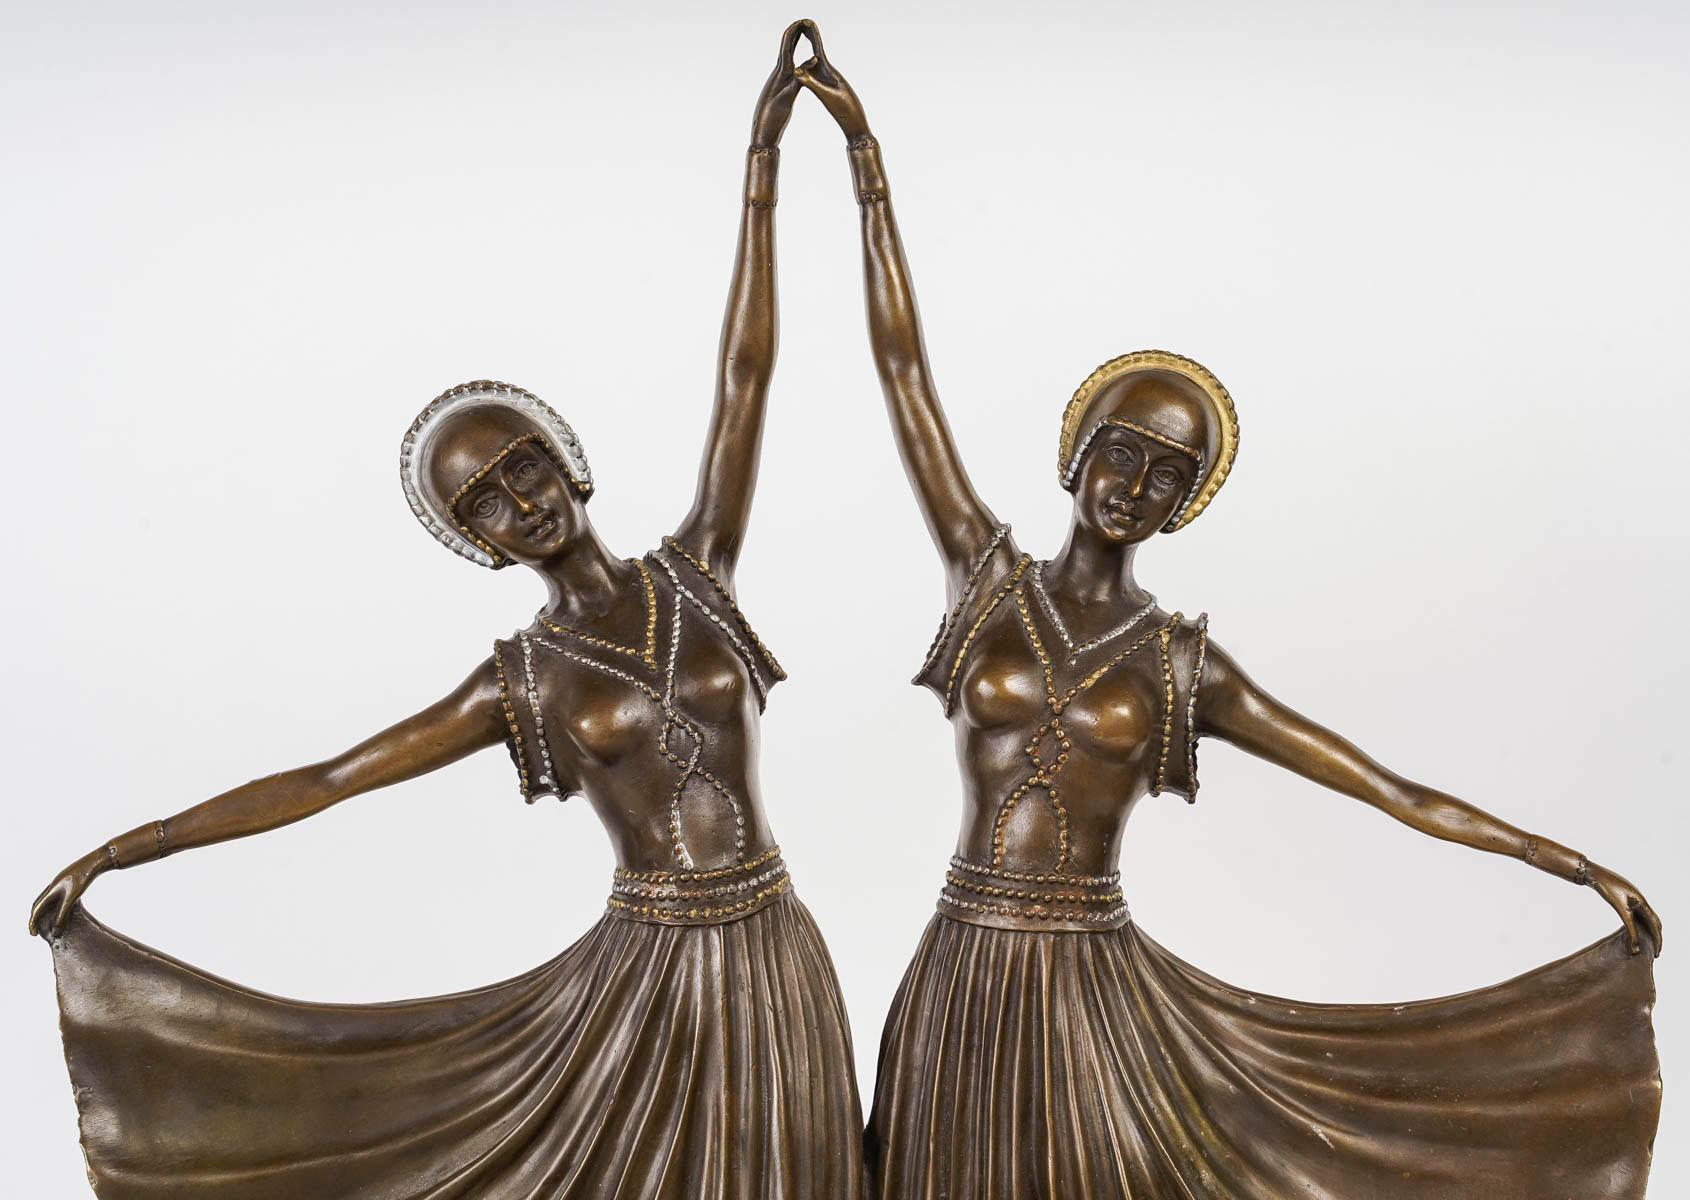 Sculpture, the Dancers in Bronze on a Marble Base in the Art Deco Style, 20th Century.

Sculpture, the Dancers in Bronze on a Marble Plinth in the Art Deco Style, second half of the 20th century.
h: 58.5cm, l: 44cm, 15cm